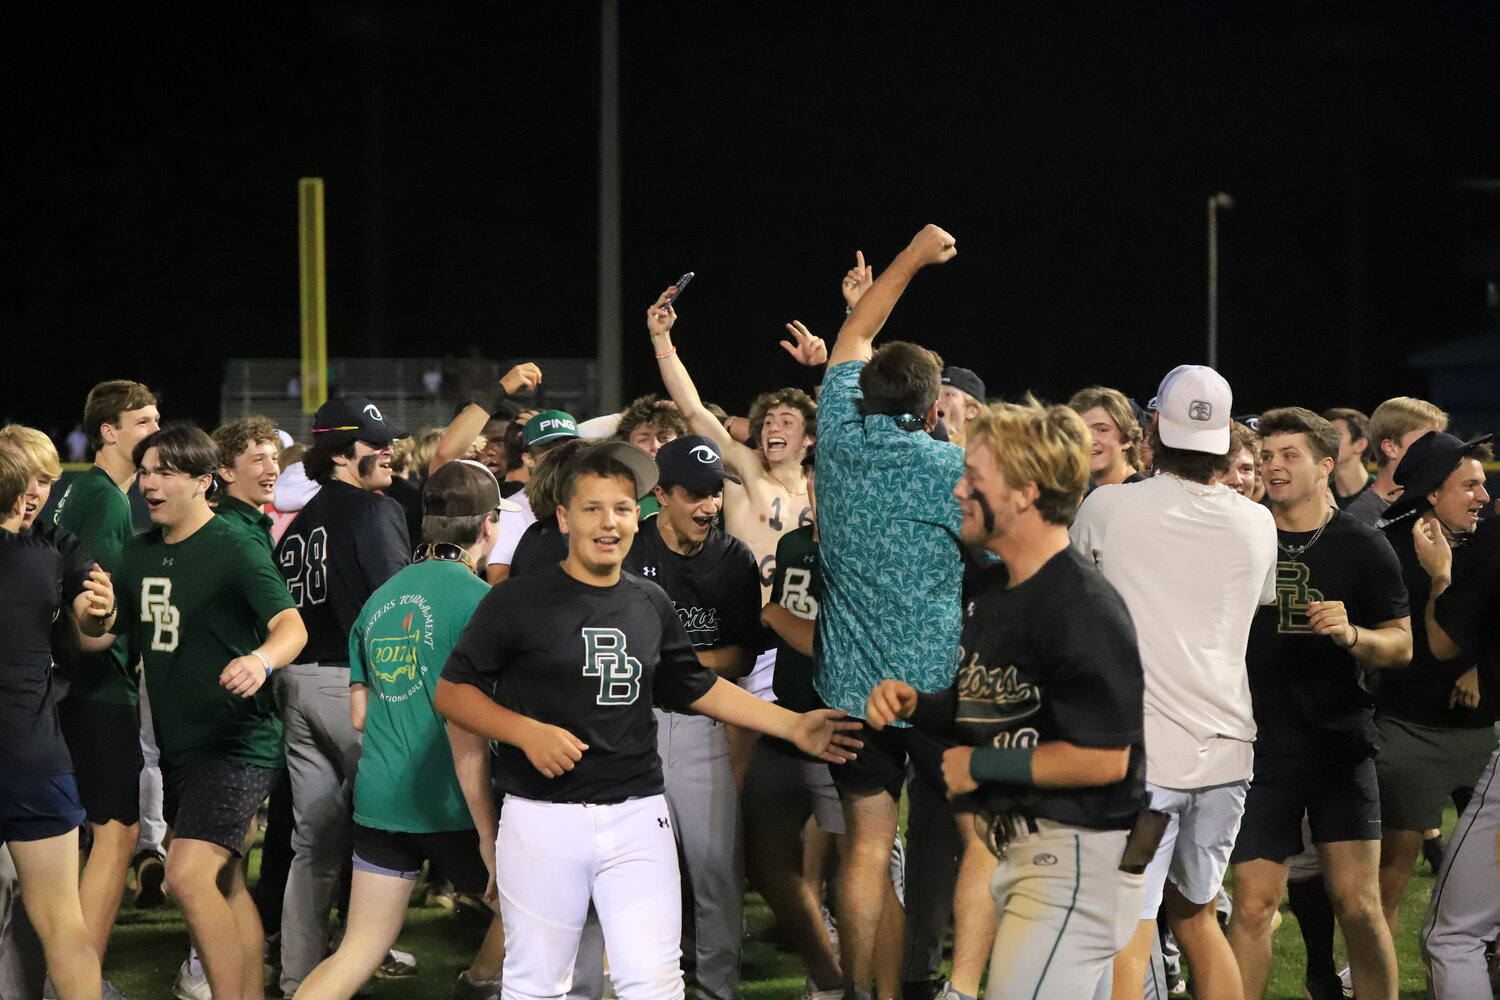 River Bluff students storm the field and join the players in celebrating the school's first ever state championship in baseball.